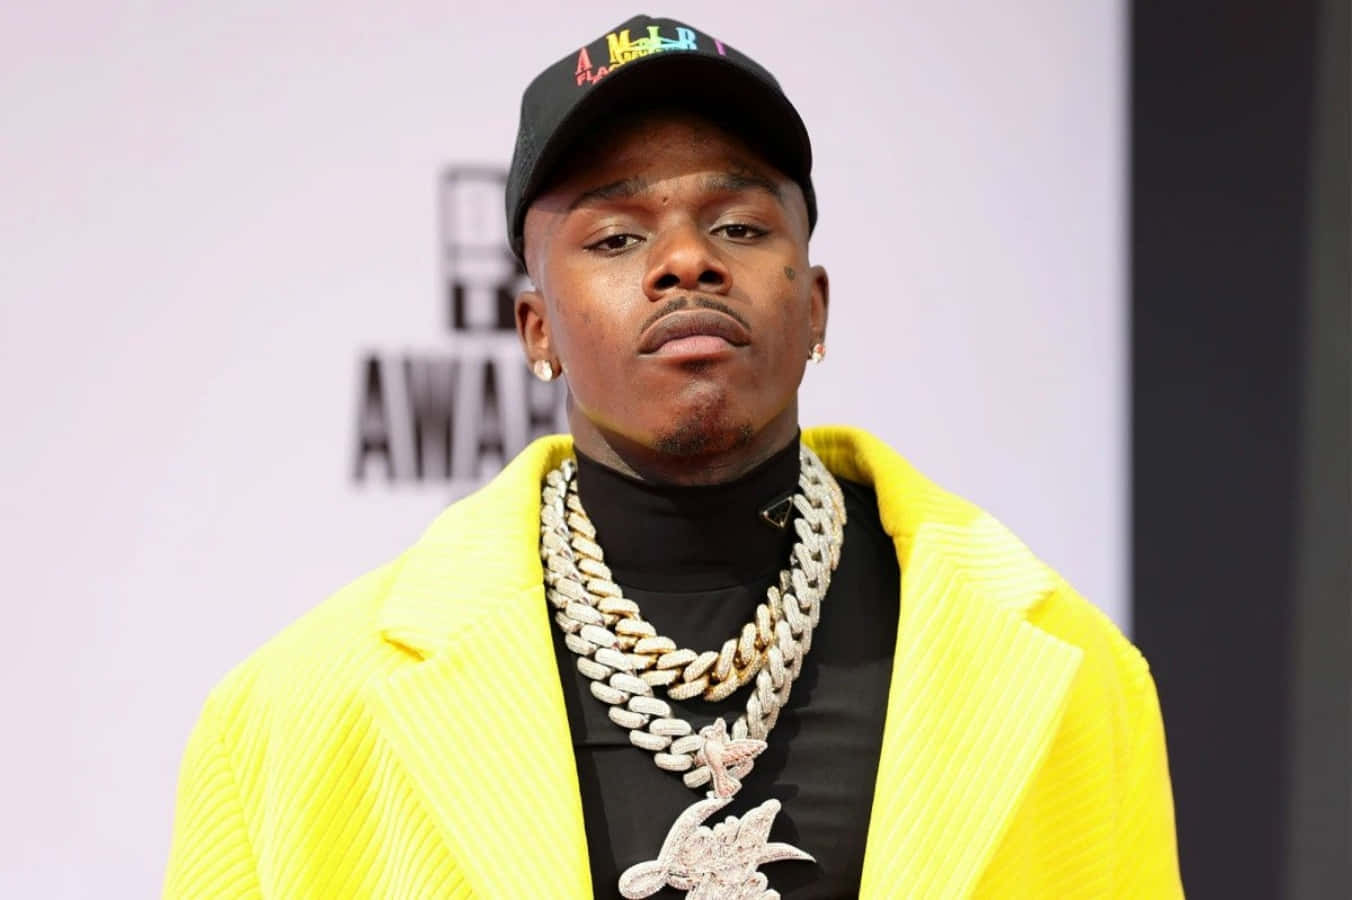 DaBaby performing live on stage